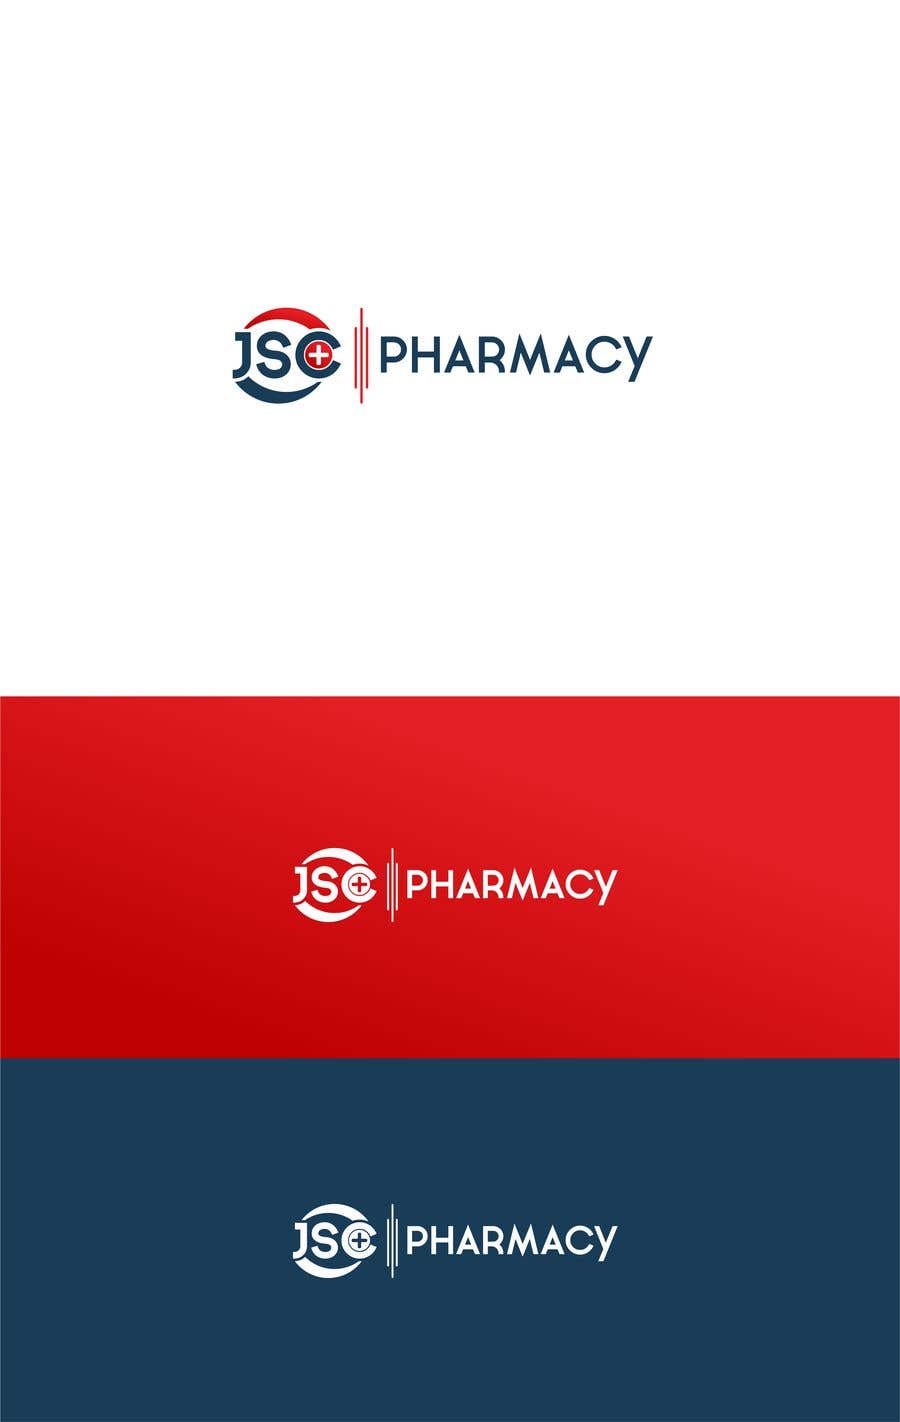 Contest Entry #1646 for                                                 NASA Contest:  Design the JSC Pharmacy Graphic
                                            